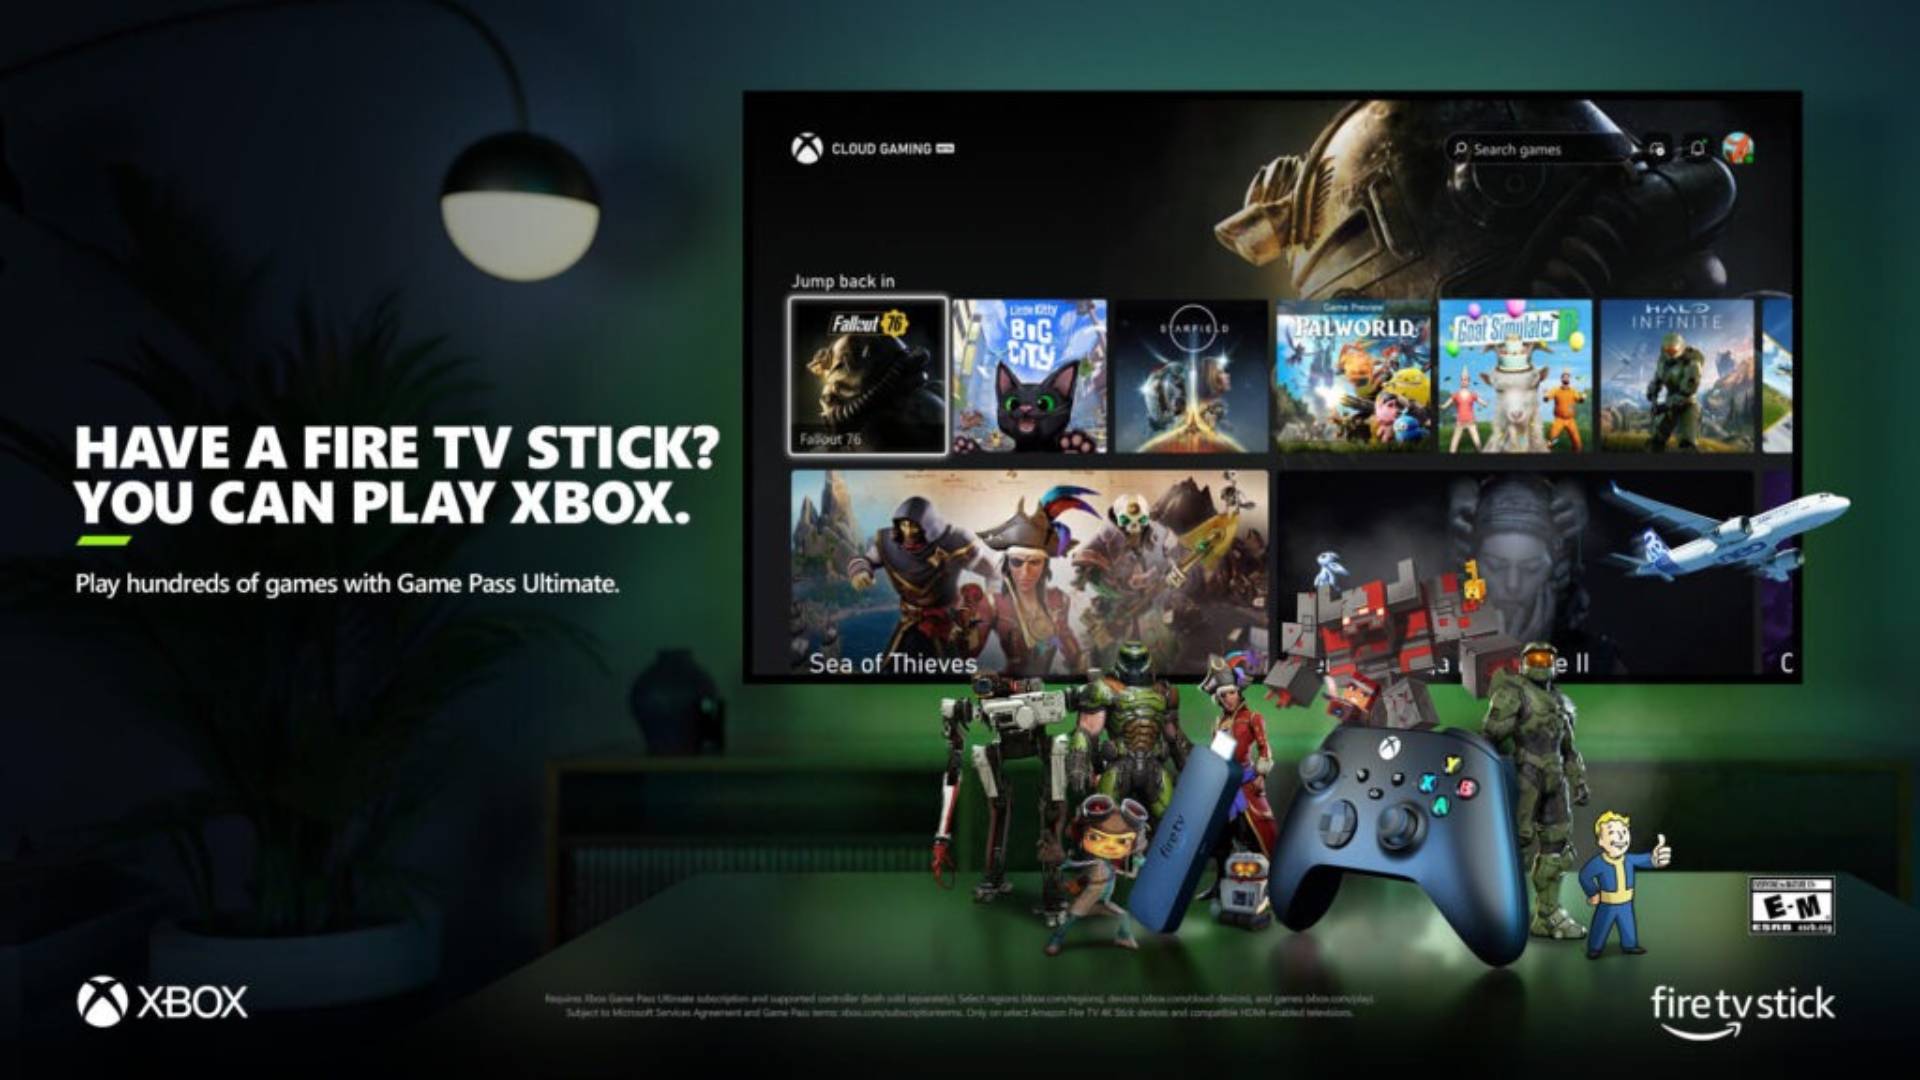 Poster announcing the availability of Xbox app on Fire TV Sticks.